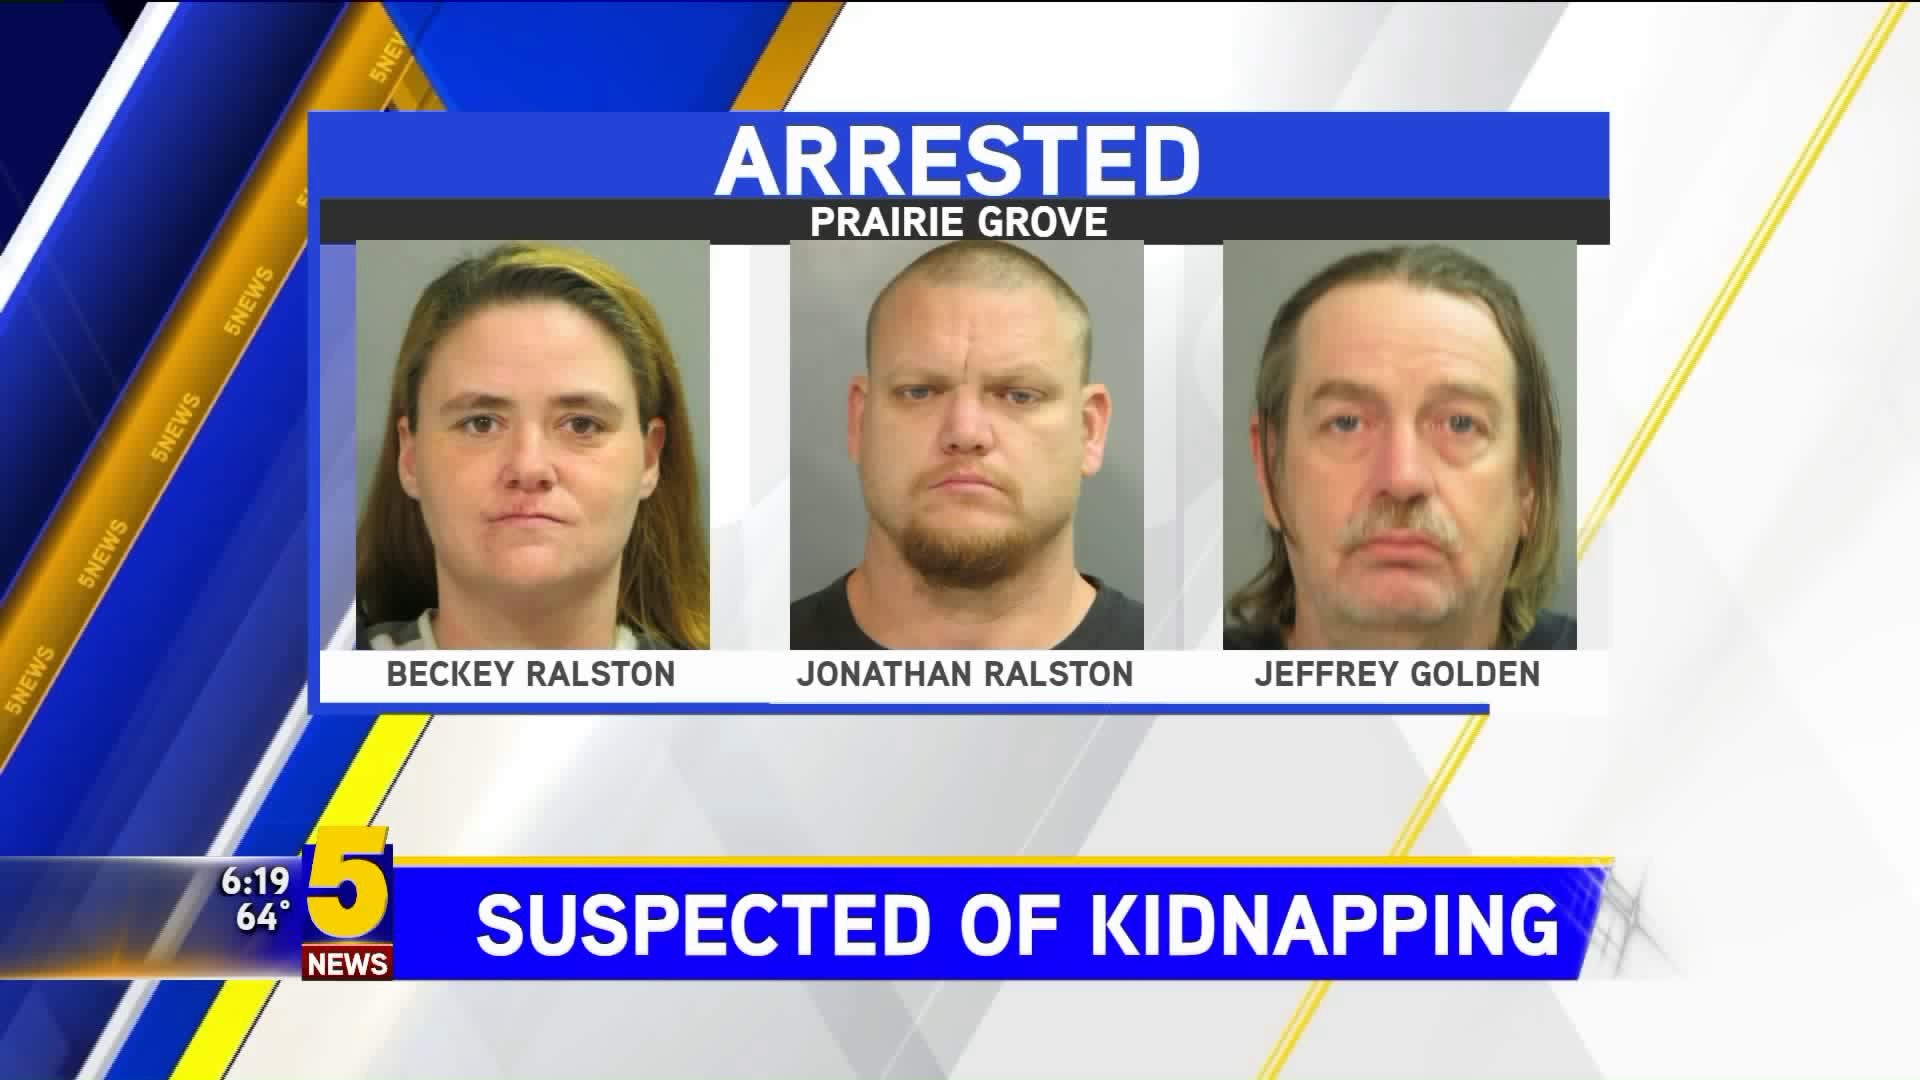 3 Arrested For Kidnapping, Robbery, Aggravted Assault